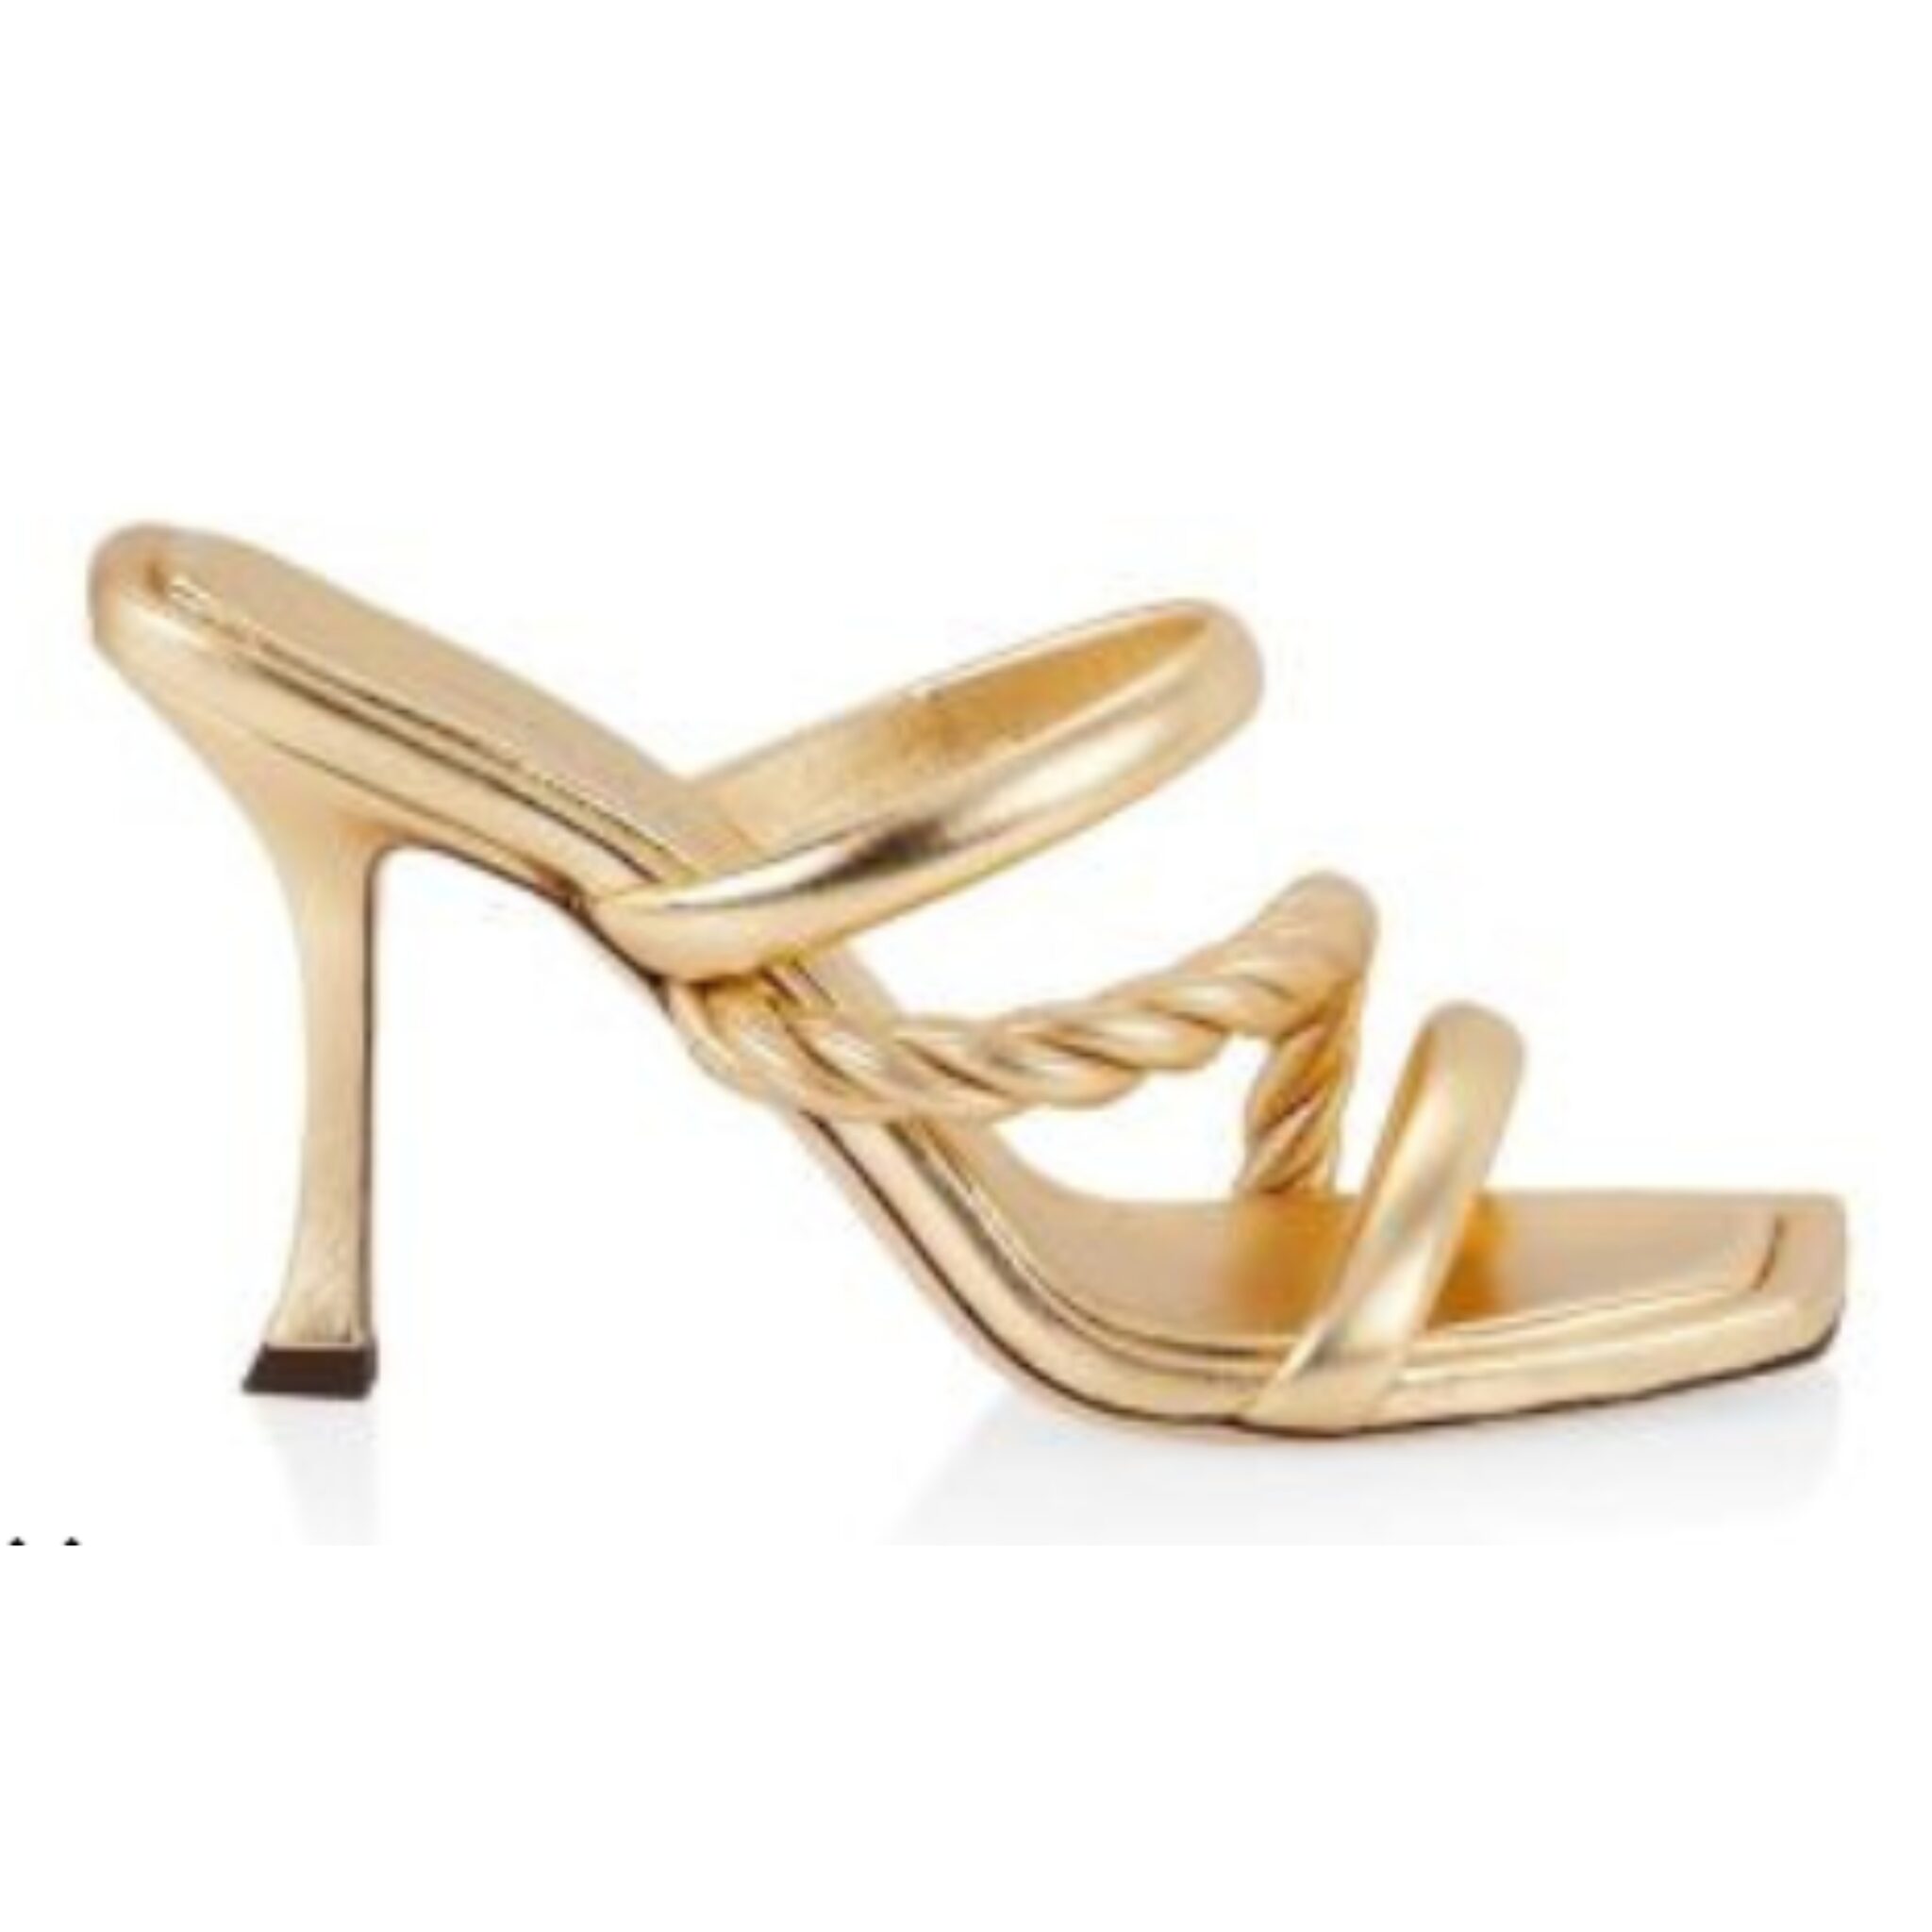 Gold sandals to wear with leather leggings.